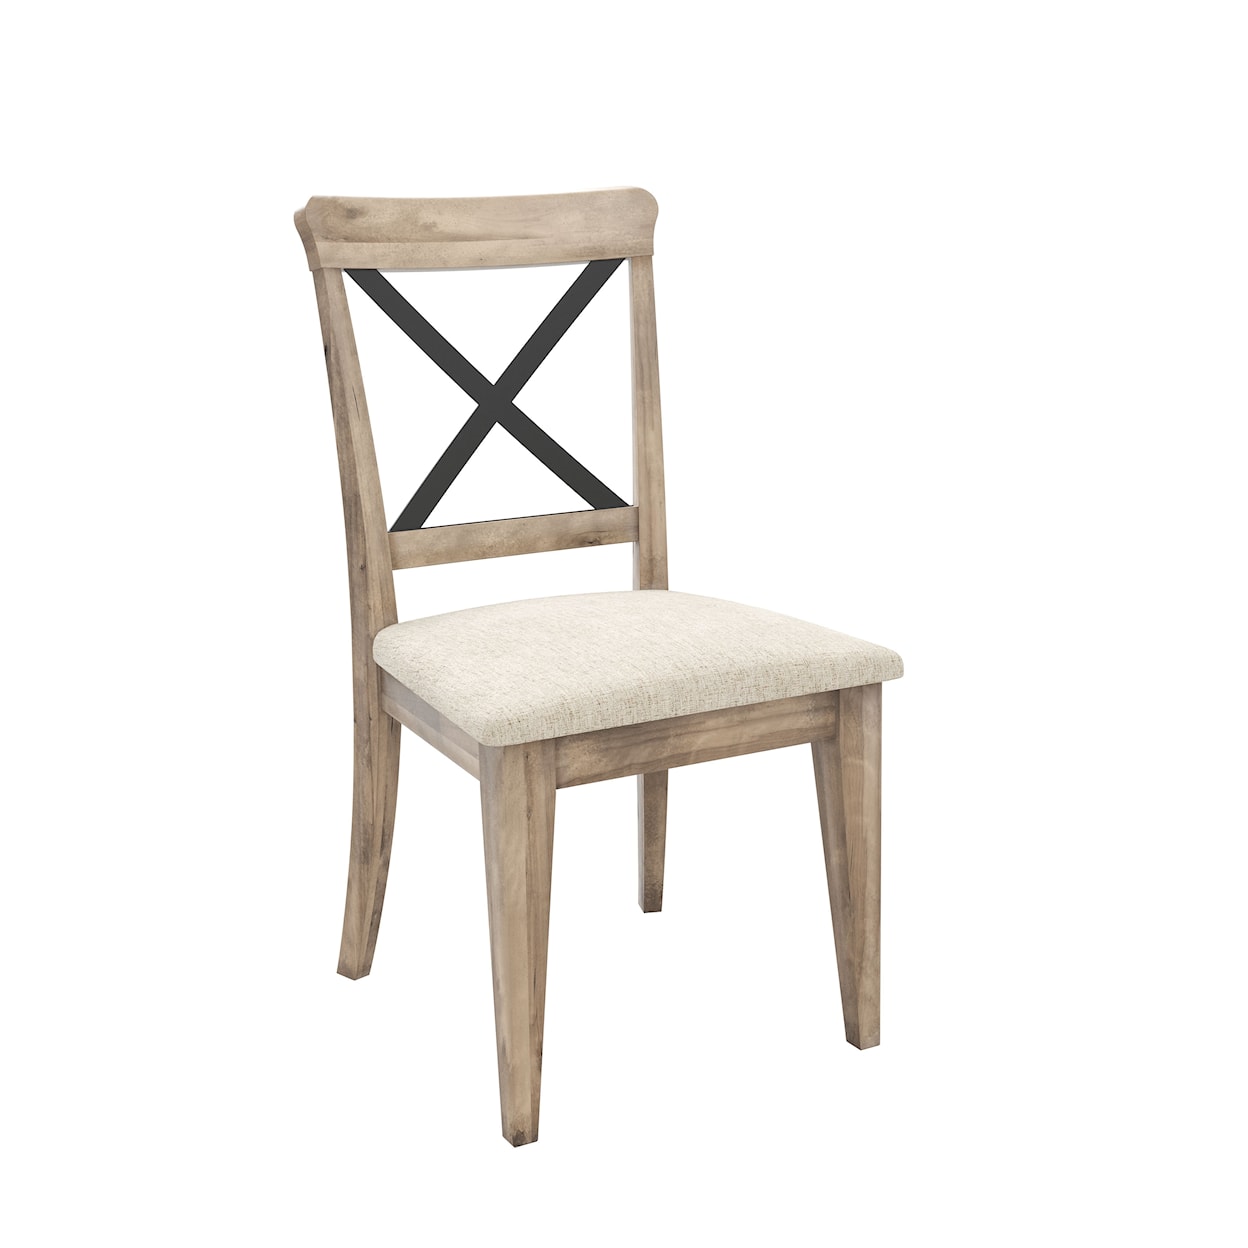 Canadel East Side Upholstered chair